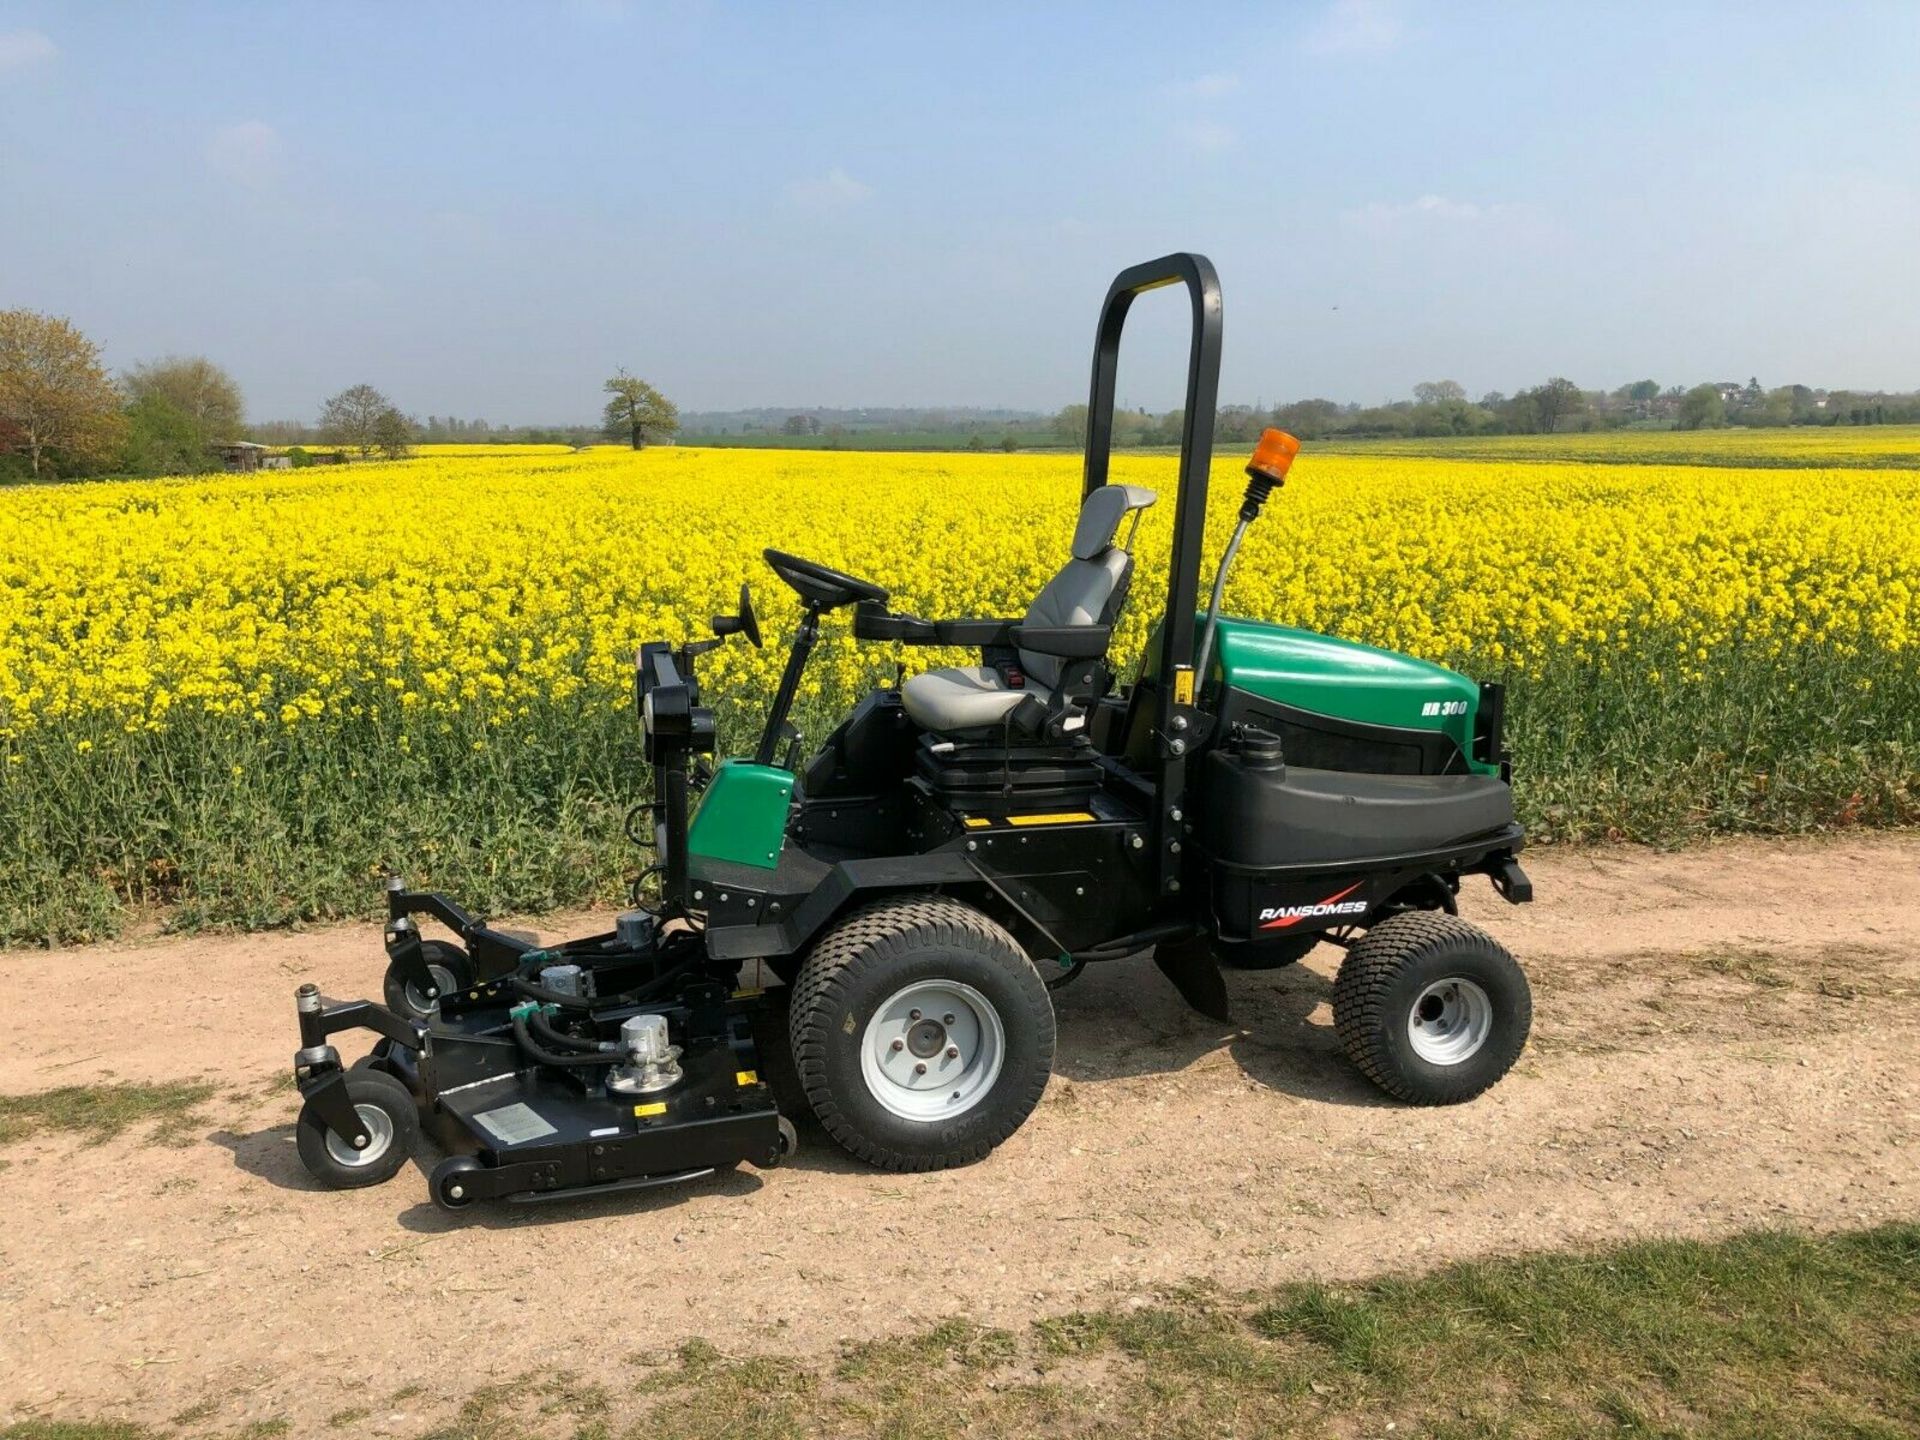 RANSOMES HR300 UPFRONT ROTARY MOWER, 60" CUT, HYDROSTATIC DRIVE, YEAR 2014, DIESEL, 4x4 *PLUS VAT* - Image 2 of 5